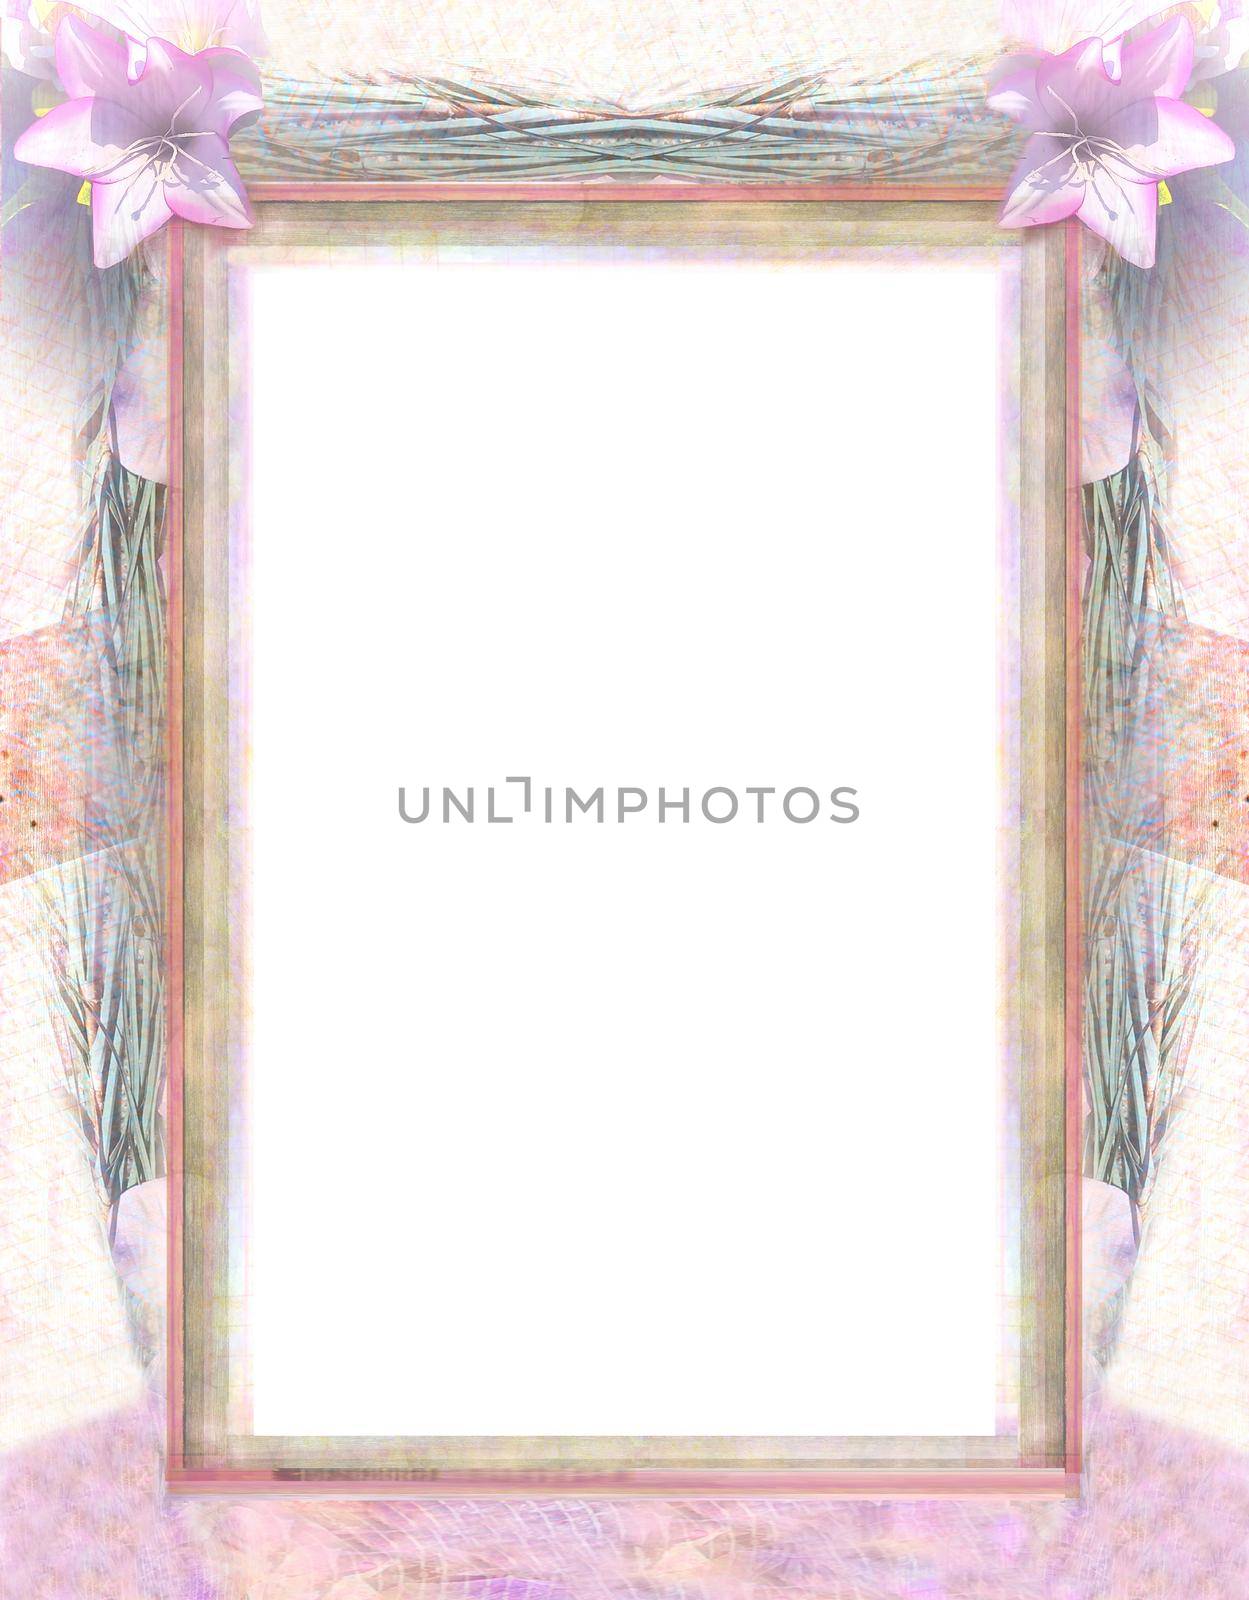 Vintage wooden Grunge Frame For Congratulation with beautiful pink flowers